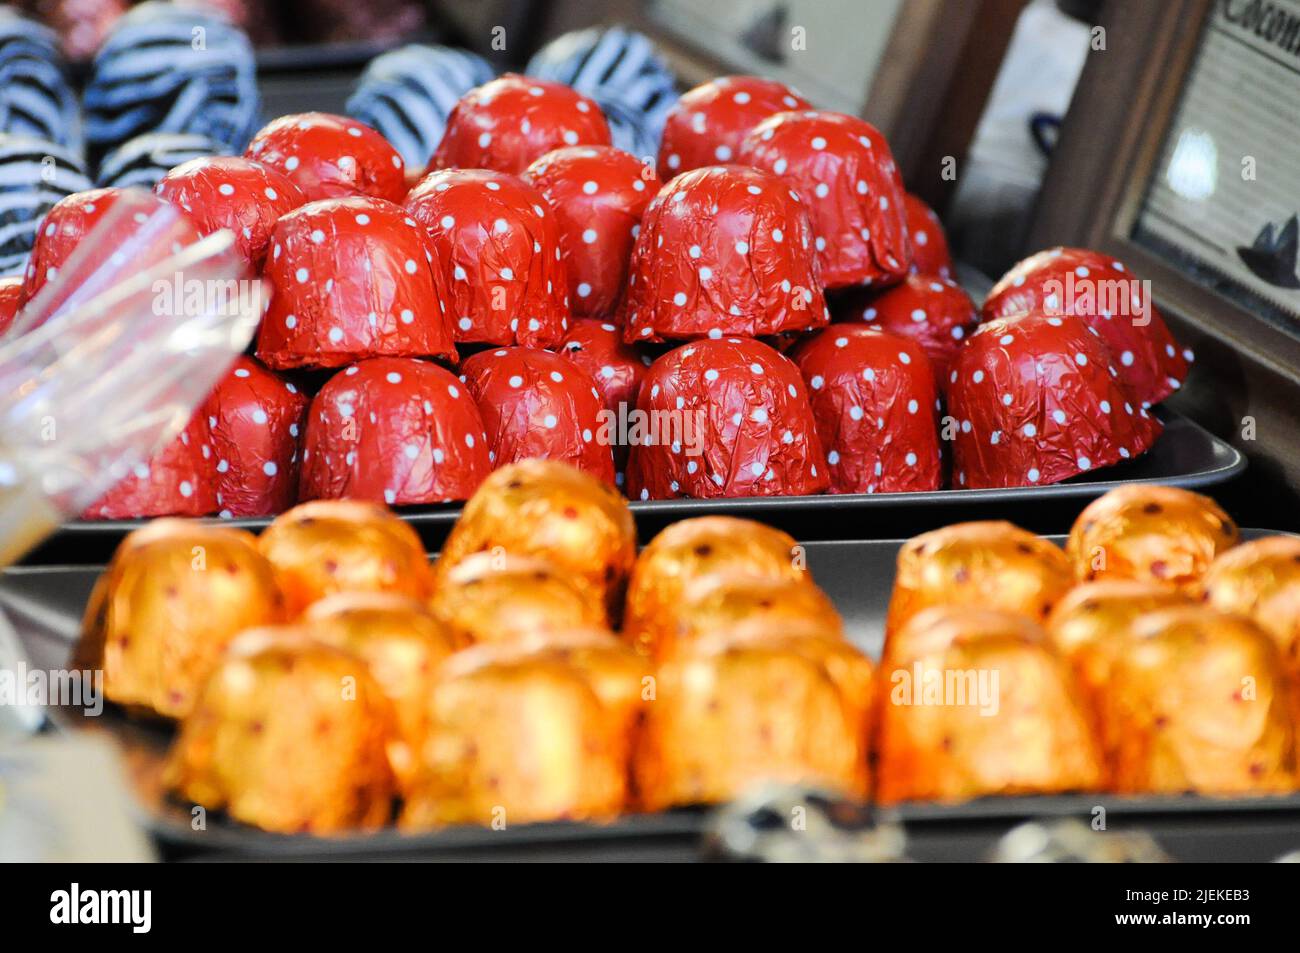 Sweet dessert in a street market in the area of The Rocks, Sydney, New South Wales, Australia. Stock Photo